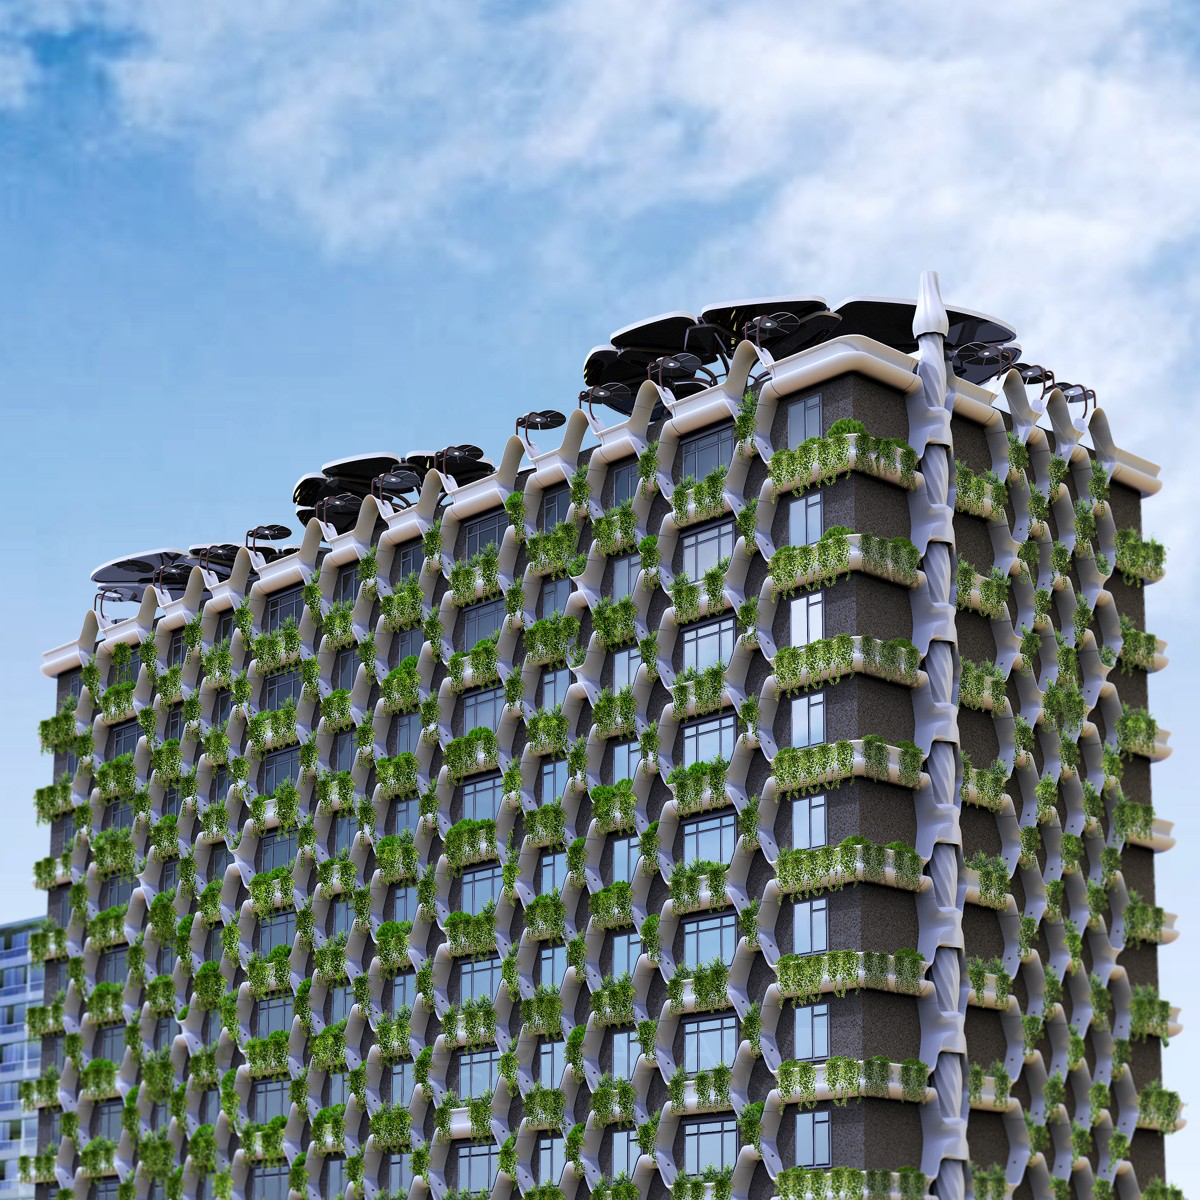 Wenkai Xue wins Iron at the prestigious A' Sustainable Products, Projects and Green Design Award with Photosynthetic City Biomass Power System.